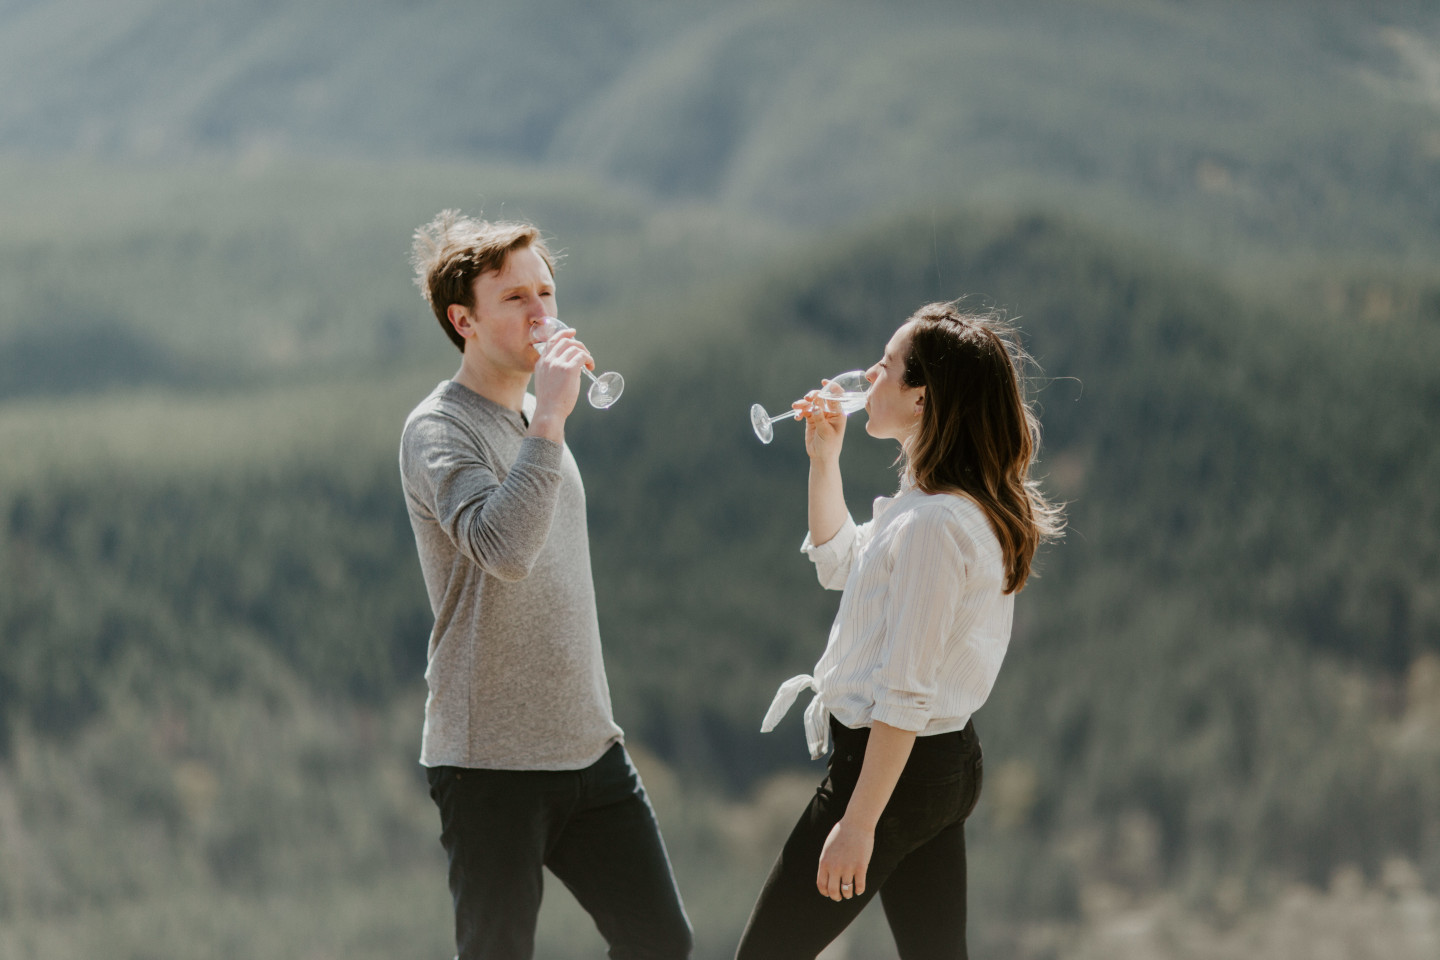 Adam and Janelle take a drink of champagne. Adventure engagement session at Rattlesnake Lake, Washington by Sienna Plus Josh.